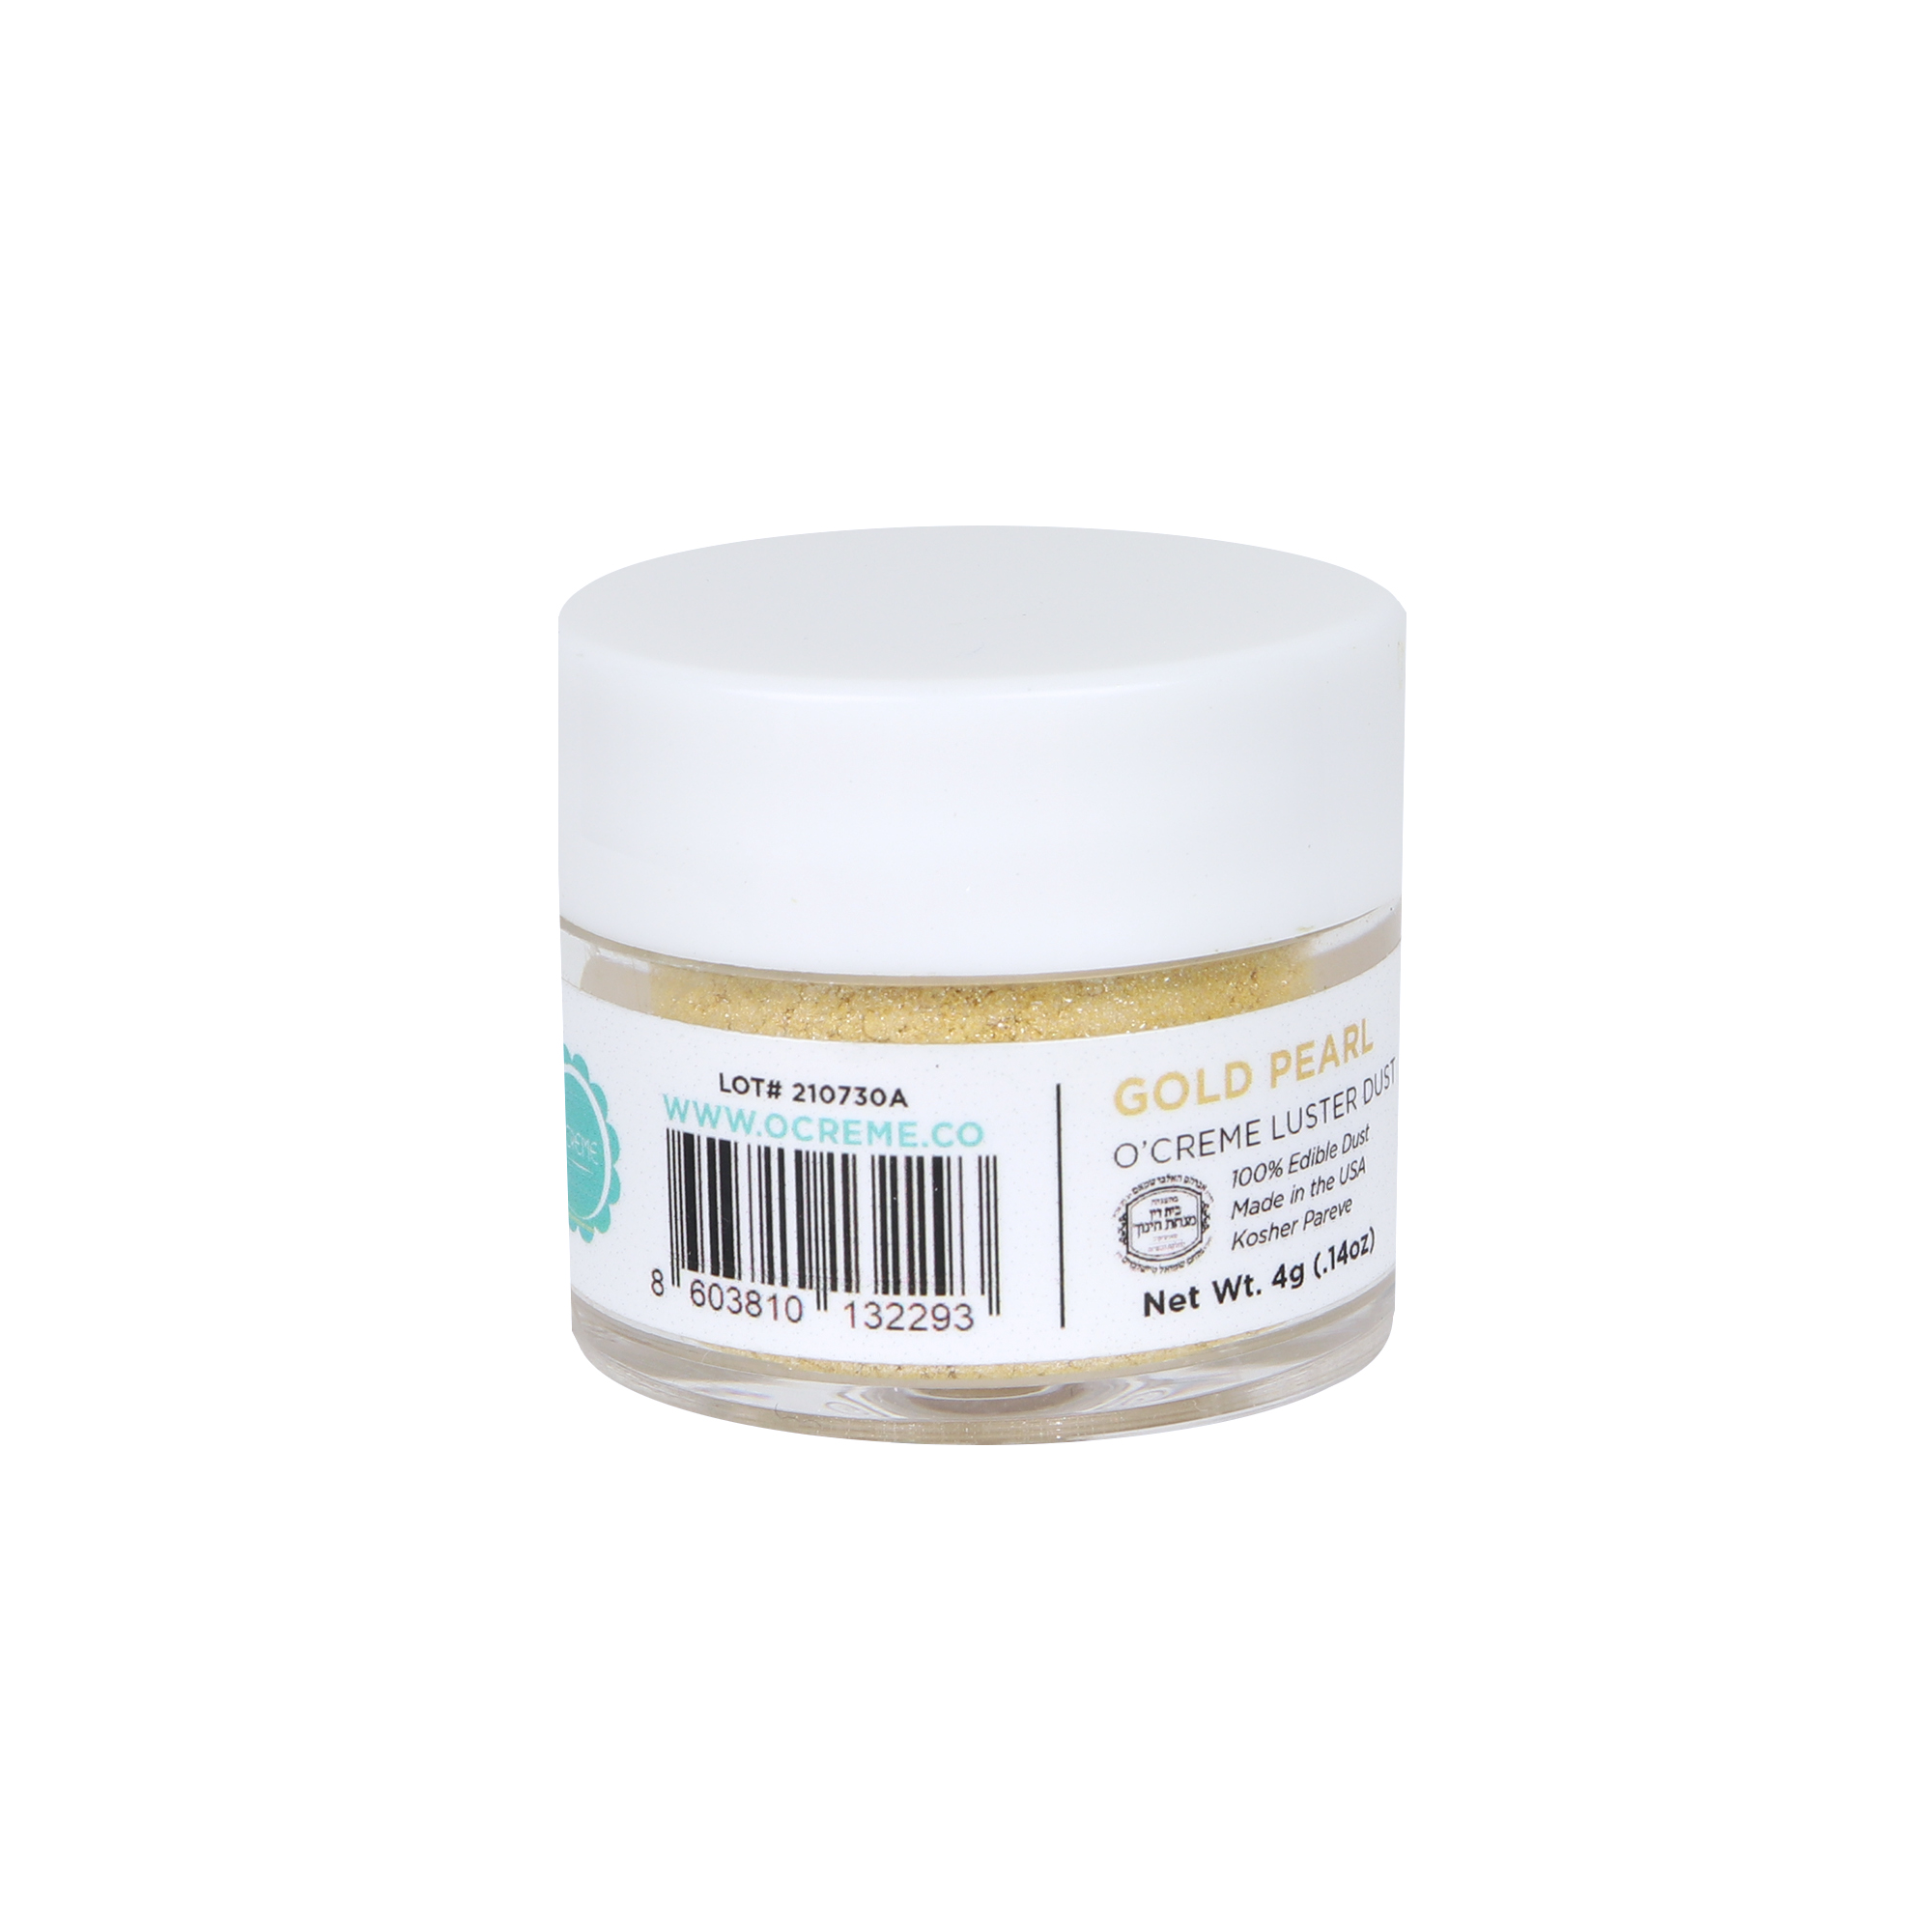 O'Creme Gold Pearl Luster Dust, 4 gr. image 1